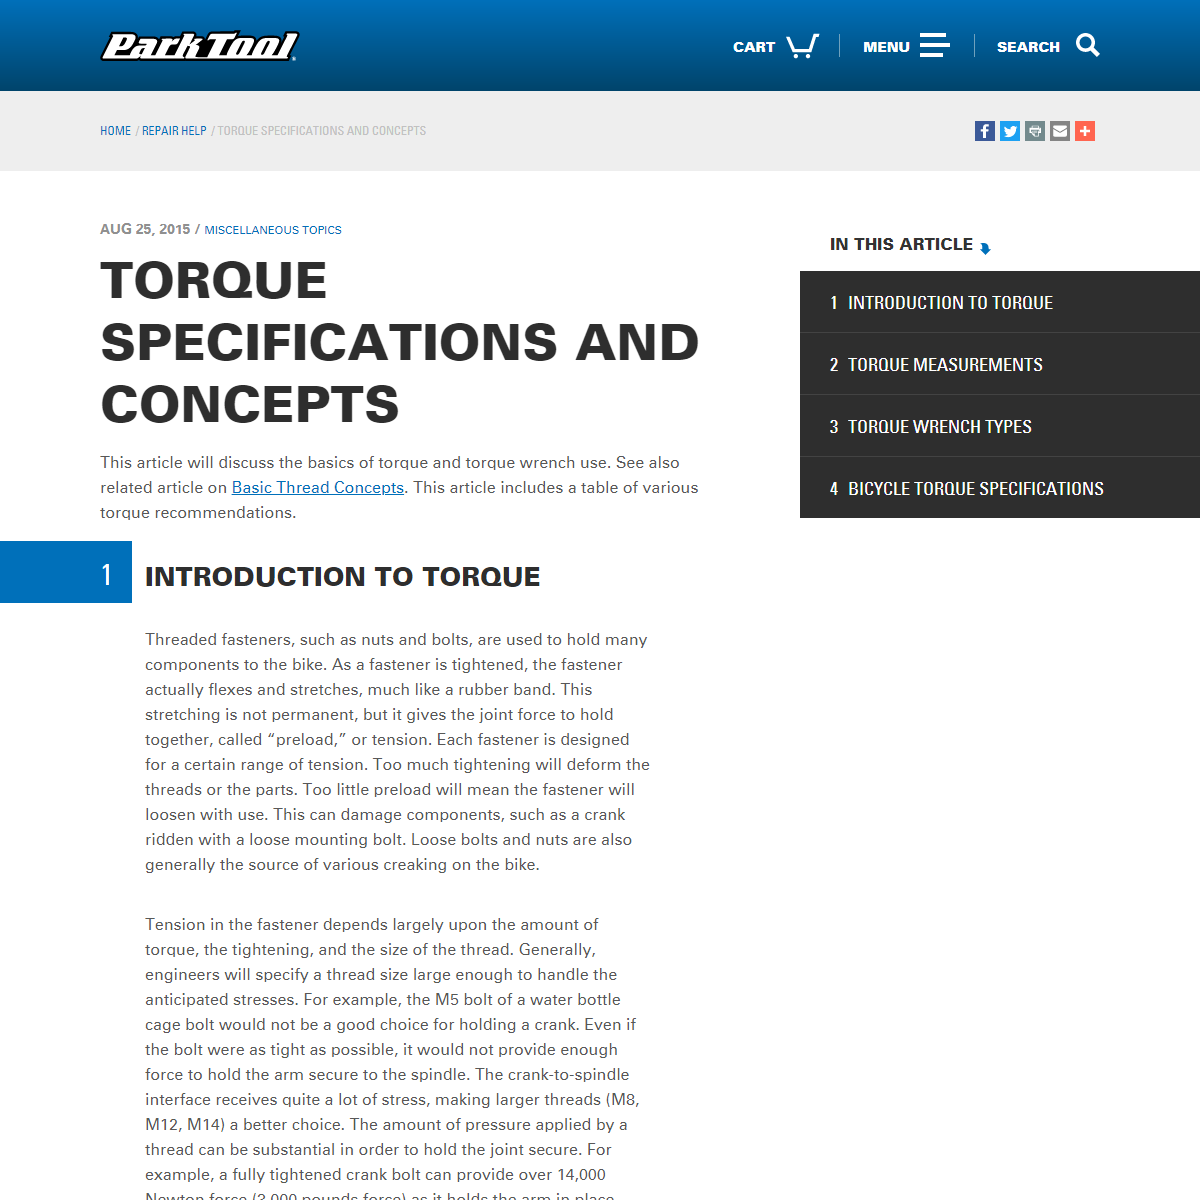 A complete backup of https://www.parktool.com/blog/repair-help/torque-specifications-and-concepts